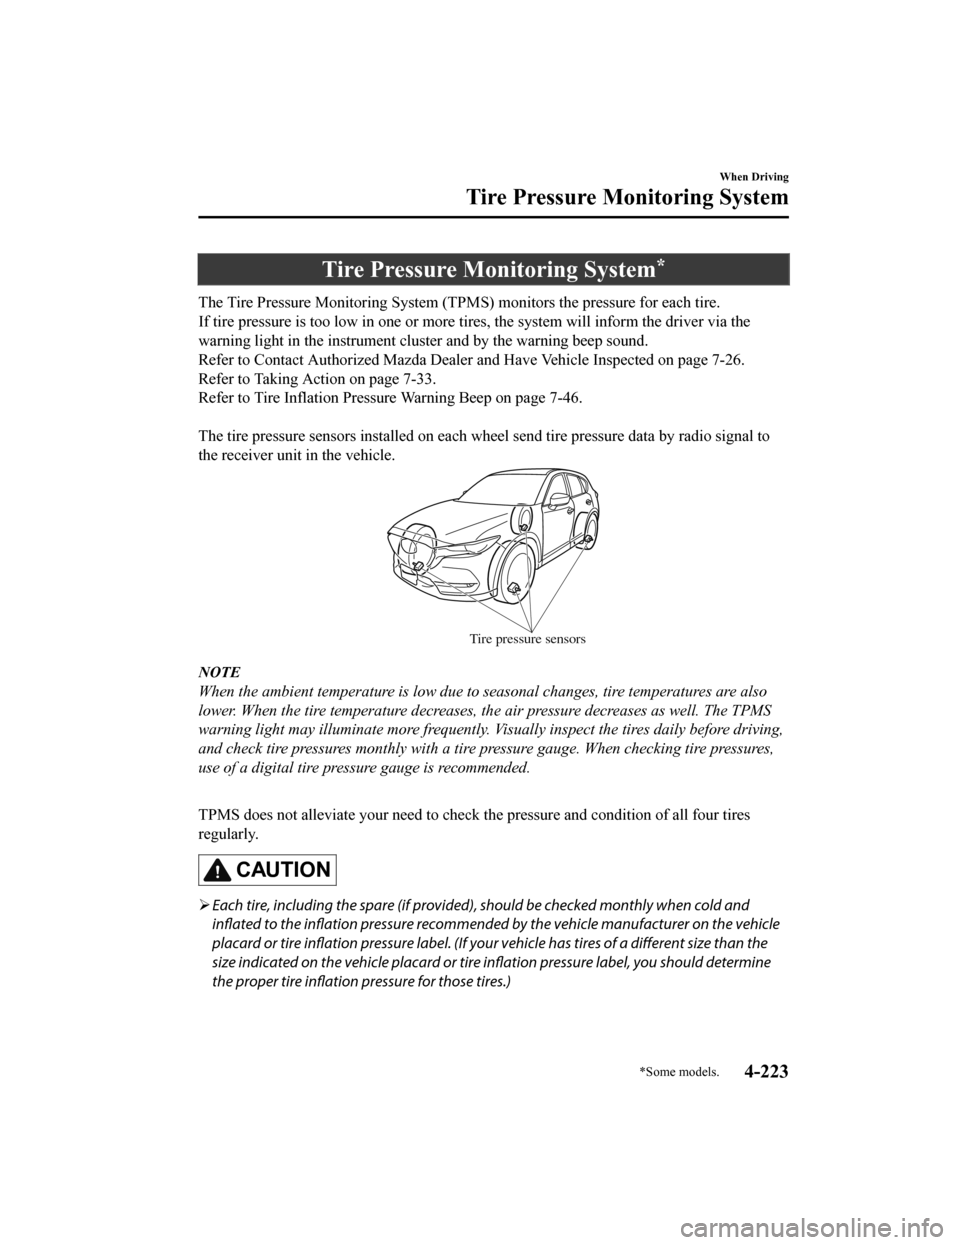 MAZDA MODEL CX-5 2020  Owners Manual (in English) Tire Pressure Monitoring System*
The Tire Pressure Monitoring System (TPMS) monitors the pressure for each tire.
If tire pressure is too low in one or more t ires, the system will inform the driver vi